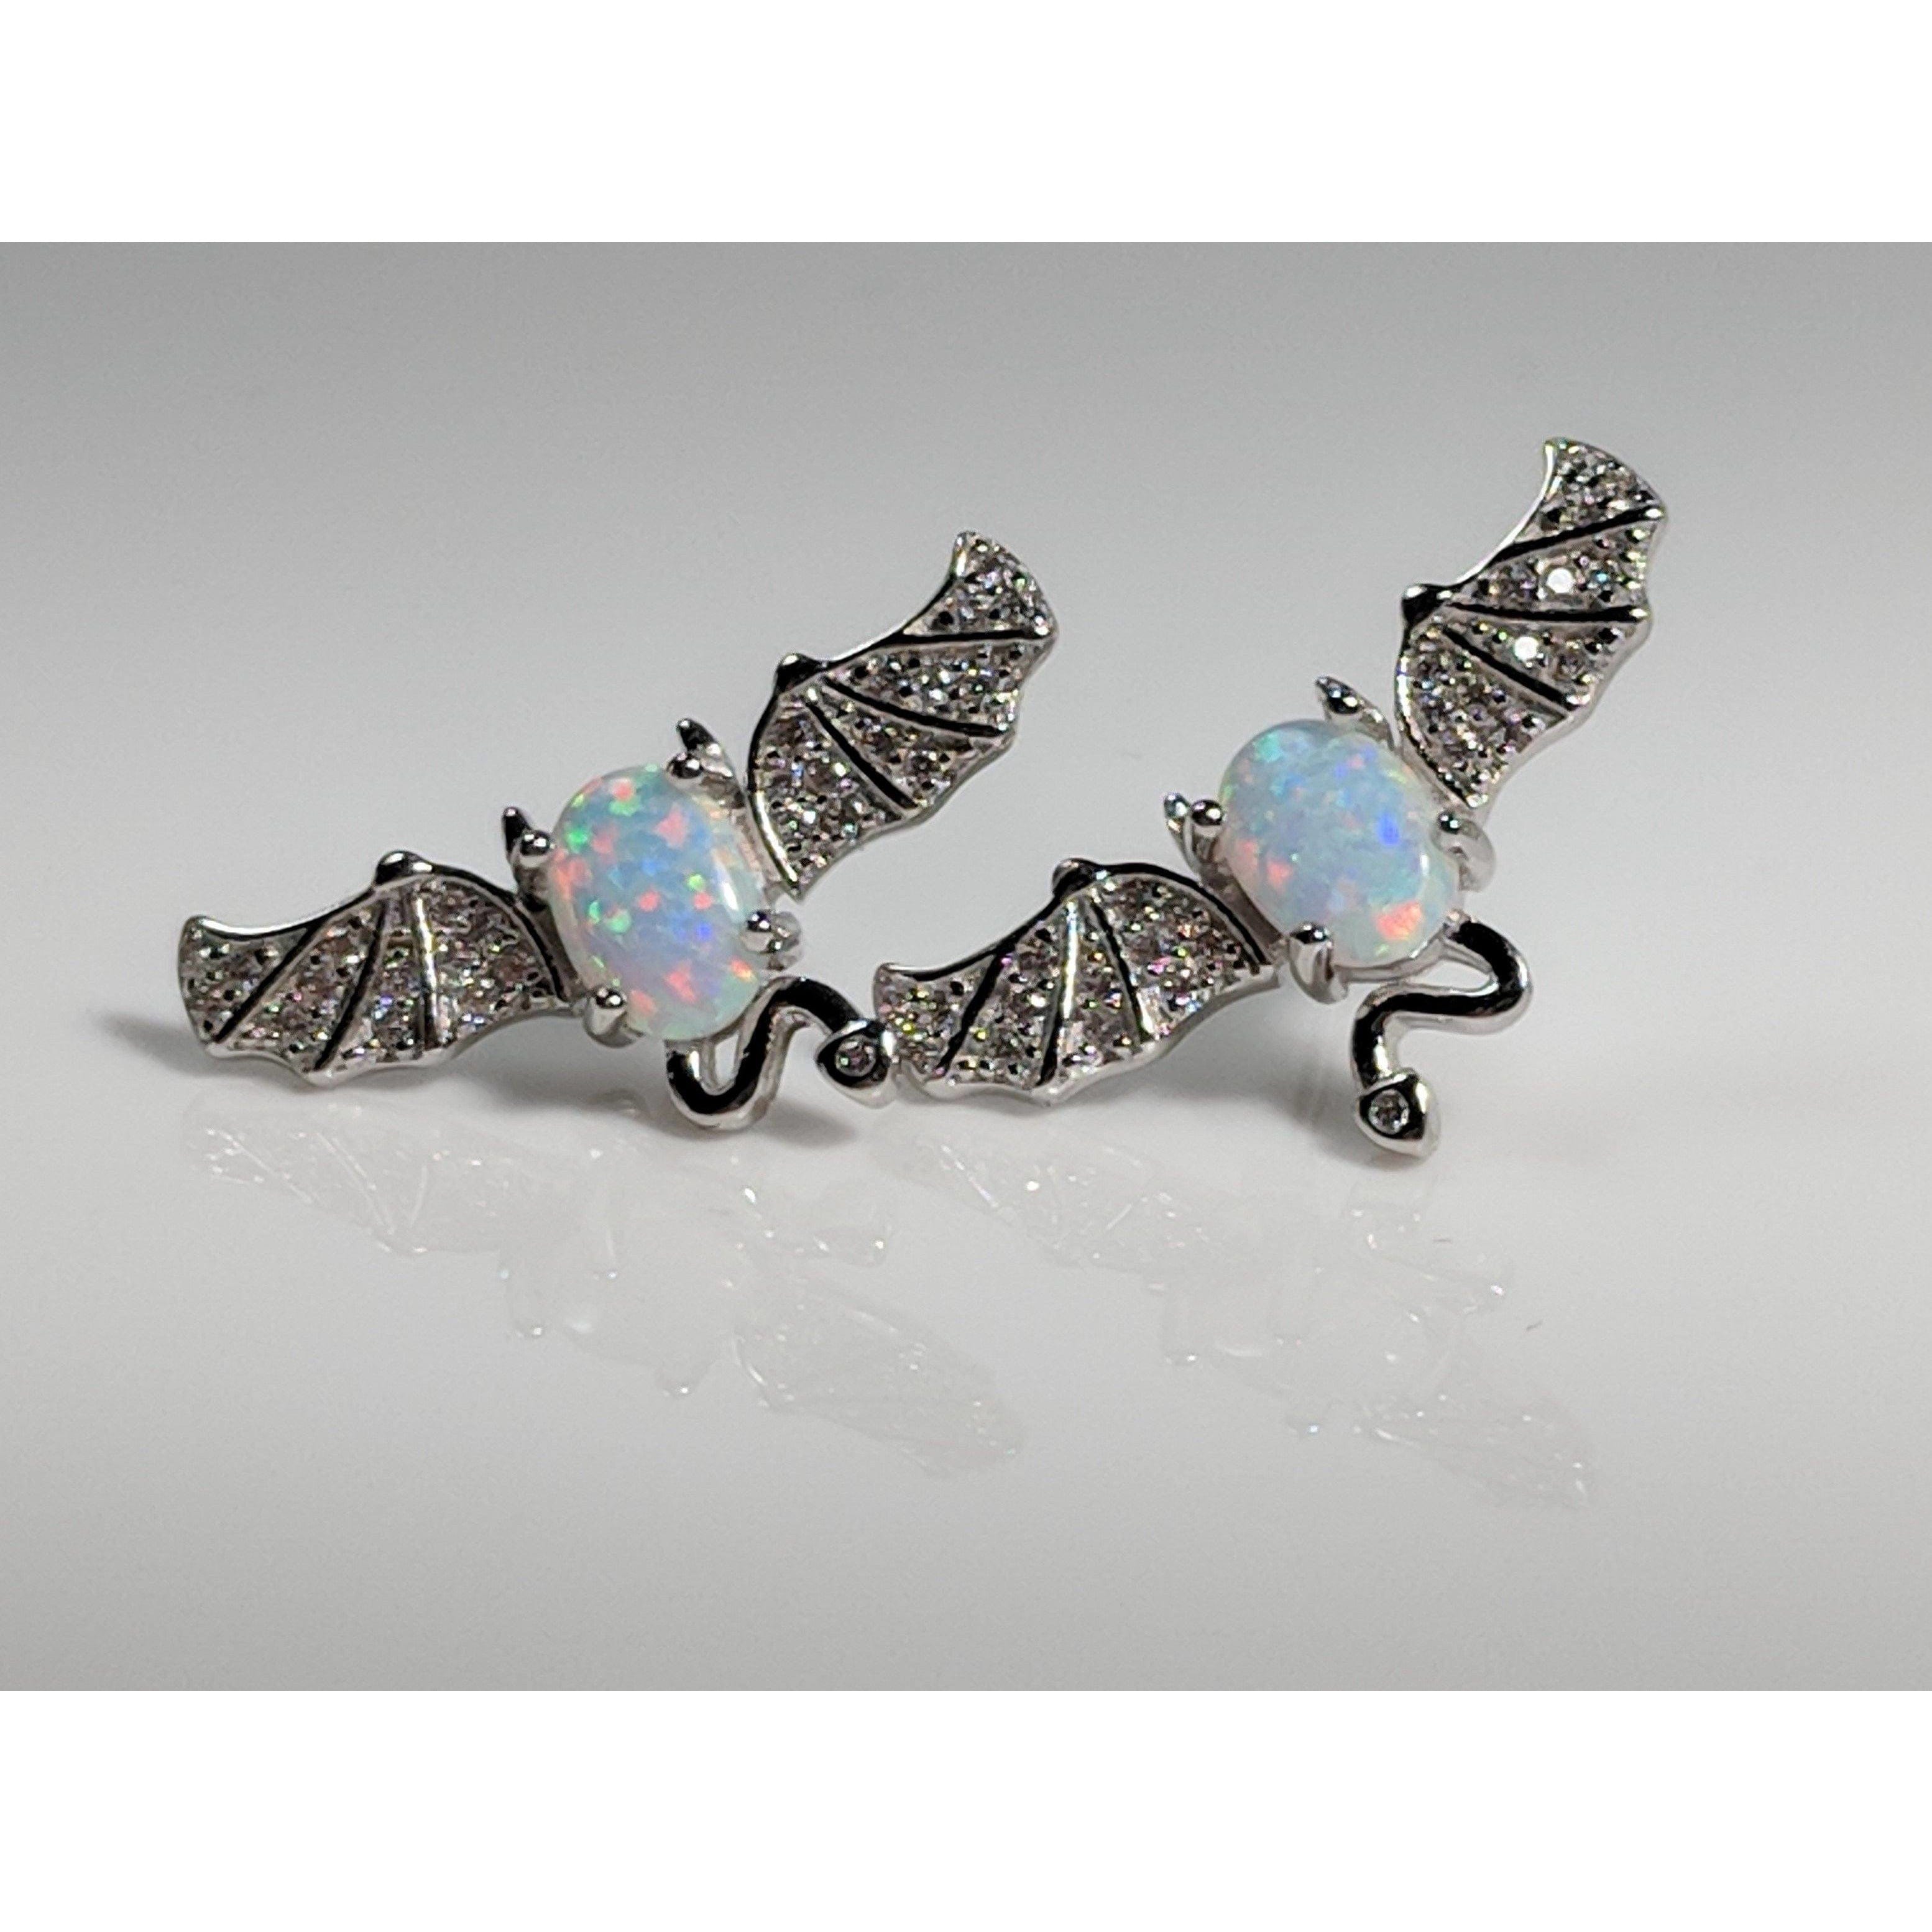 Bat Jewelry Created Opal, Sterling Silver, Tons of CUTE! Perfect for Halloween! - The Pink Pigs, A Compassionate Boutique